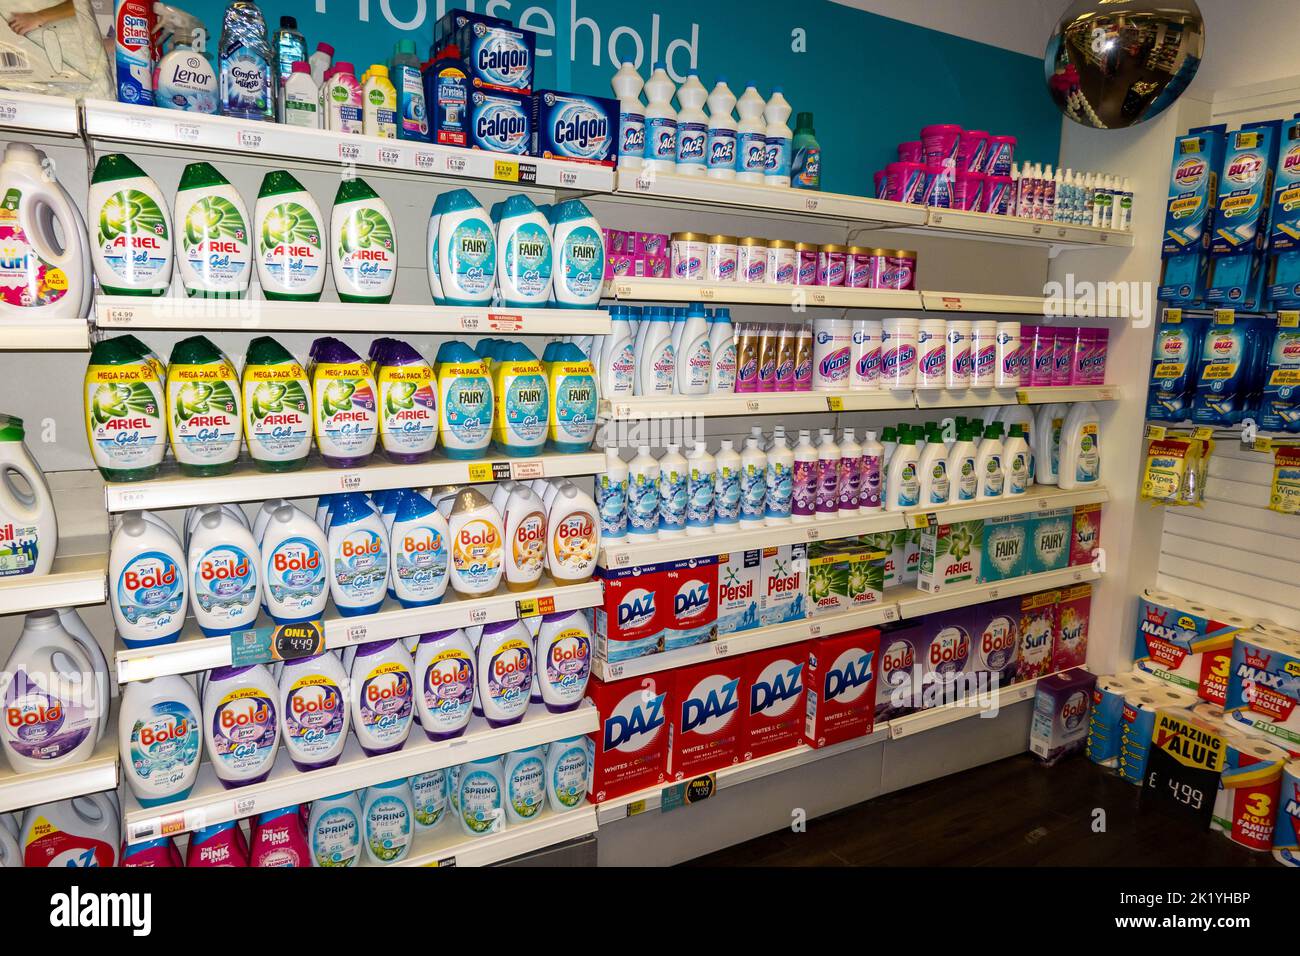 Soap powder products on a supermarket shelves Stock Photo